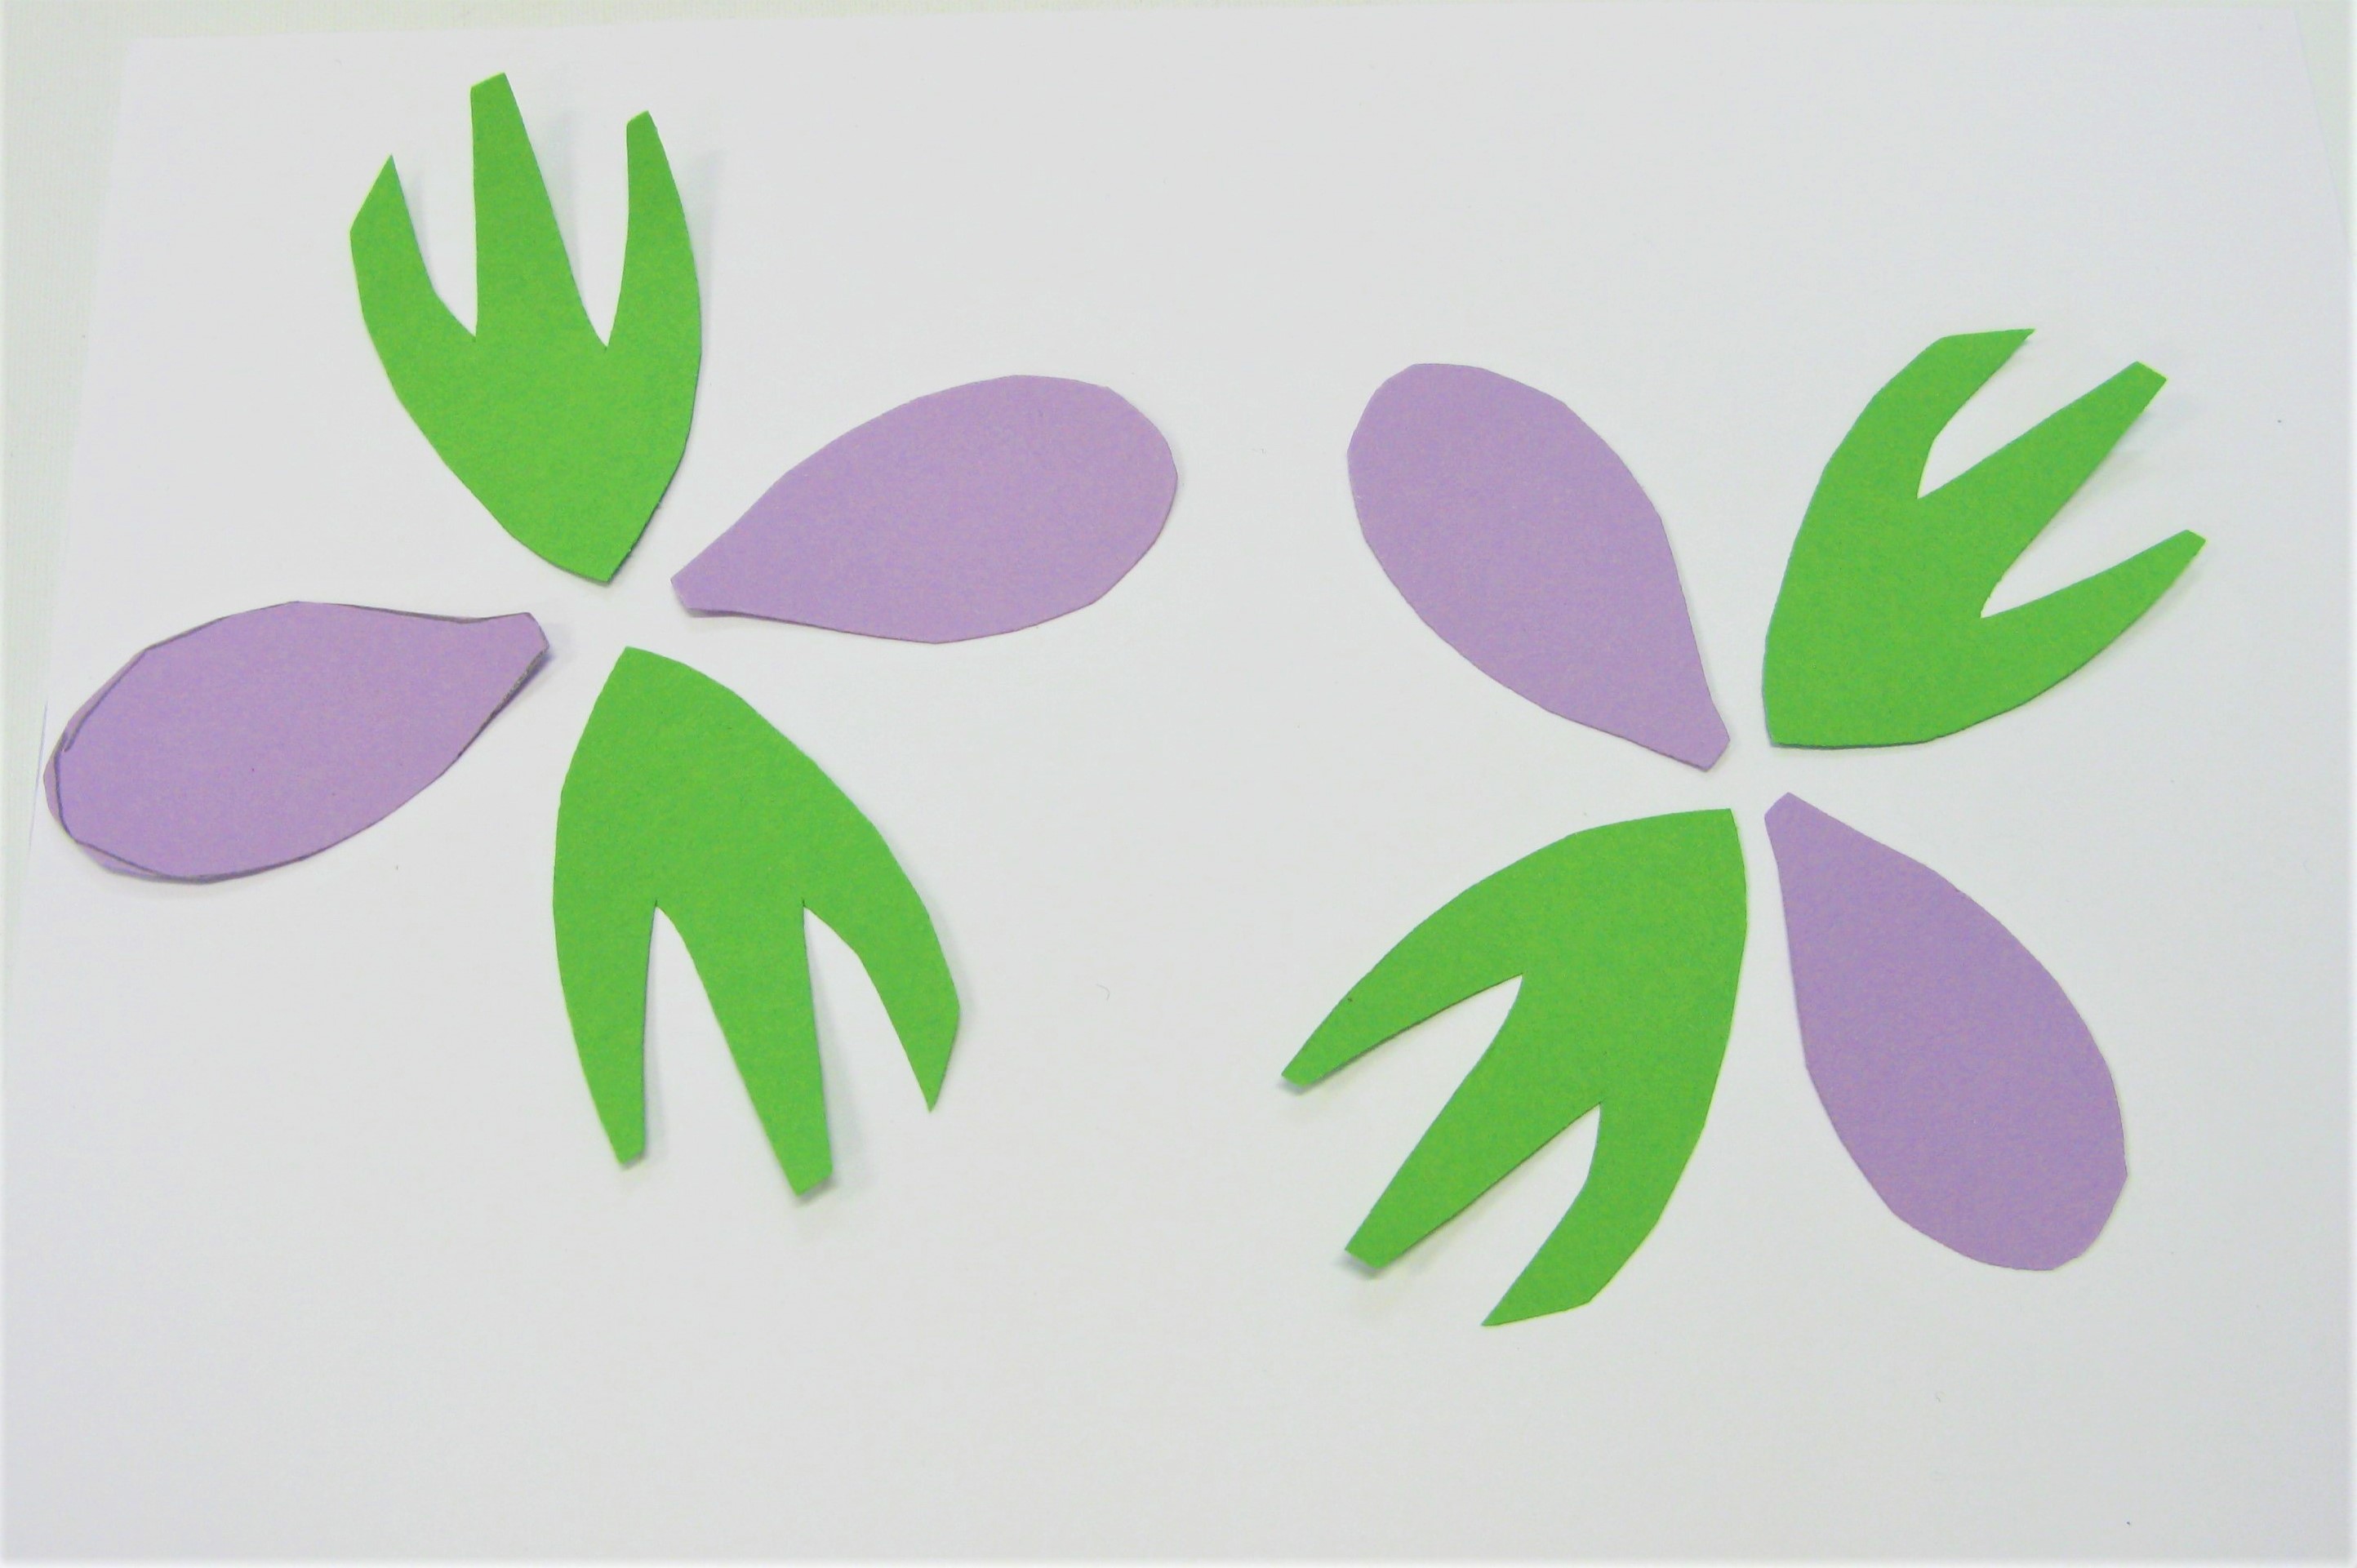 A pattern made from paper shapes inspired by plants